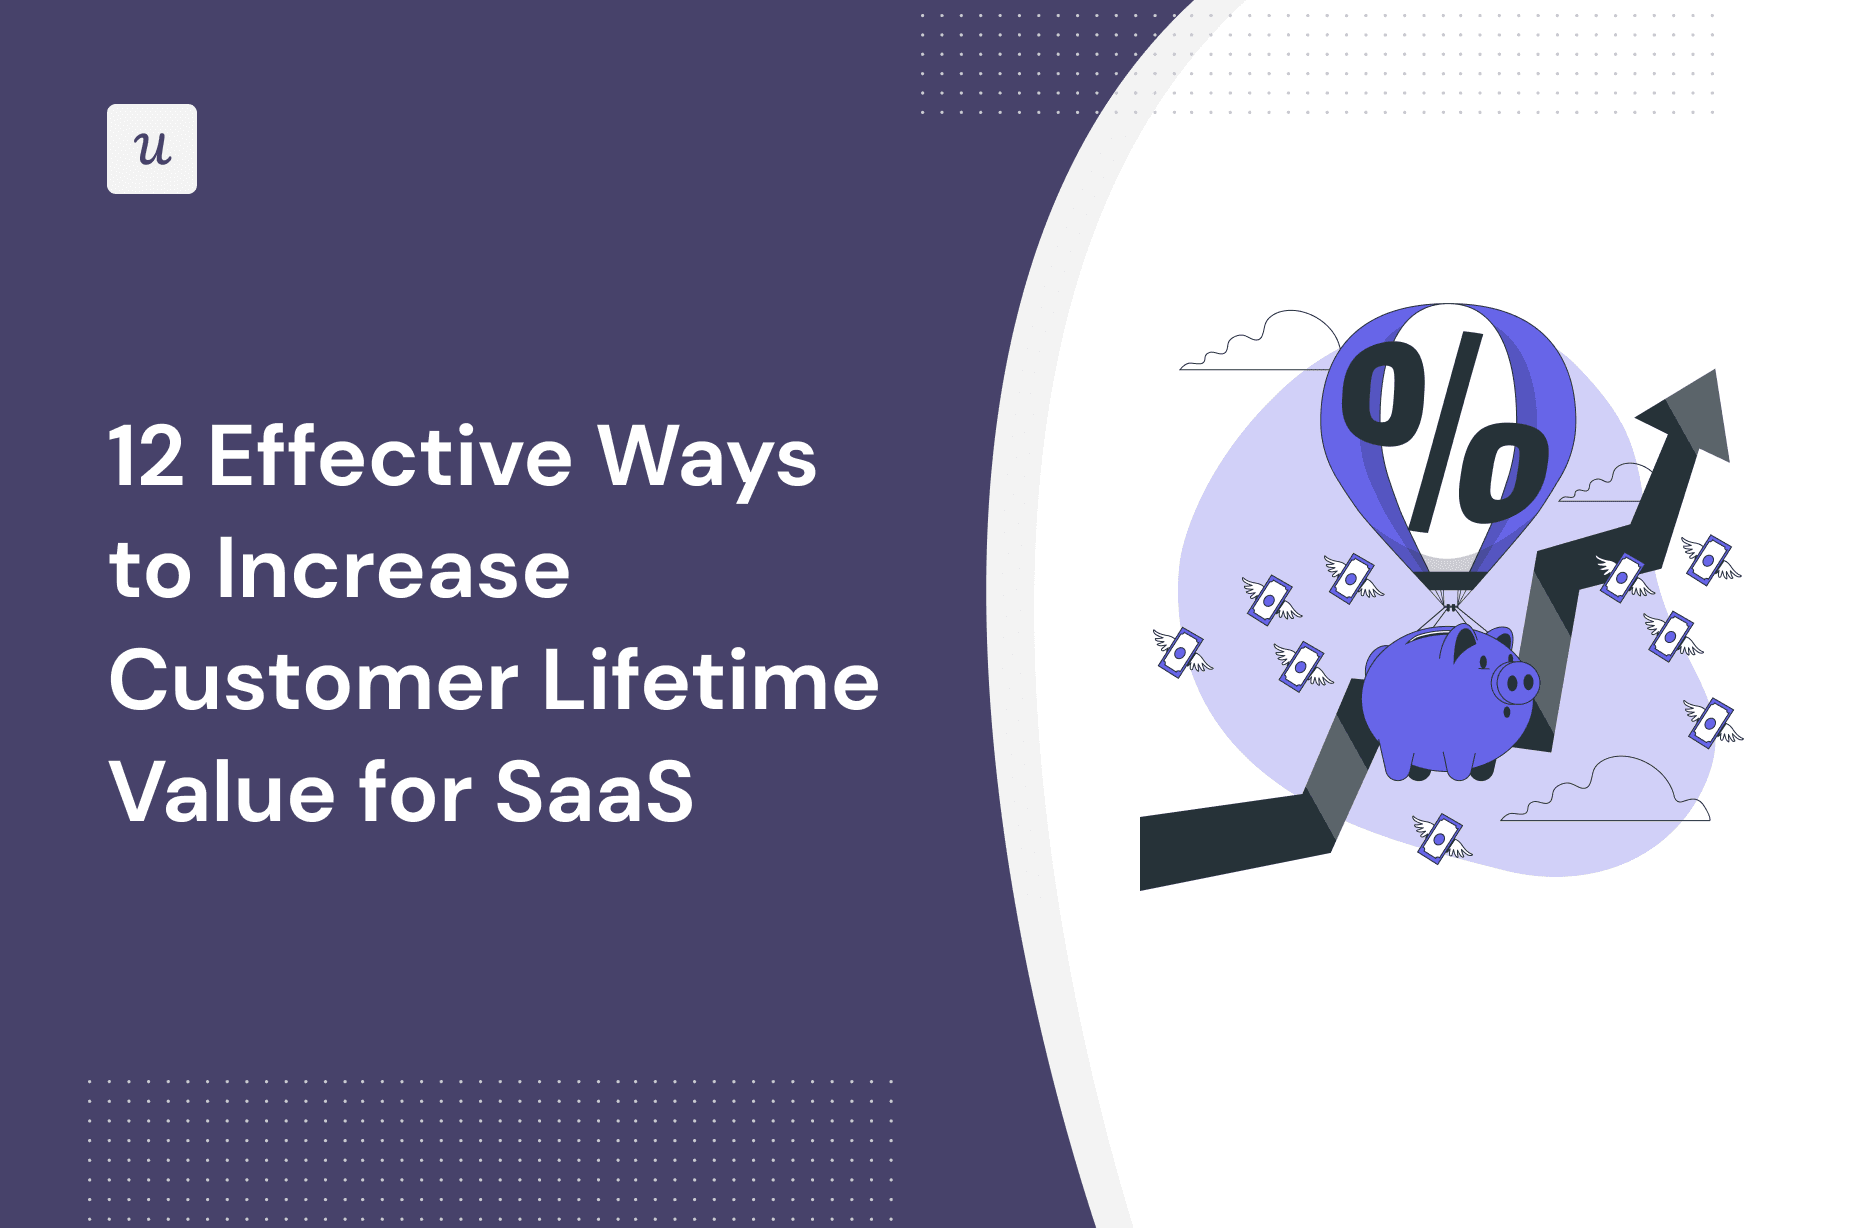 12 Effective Ways to Increase Customer Lifetime Value for SaaS cover